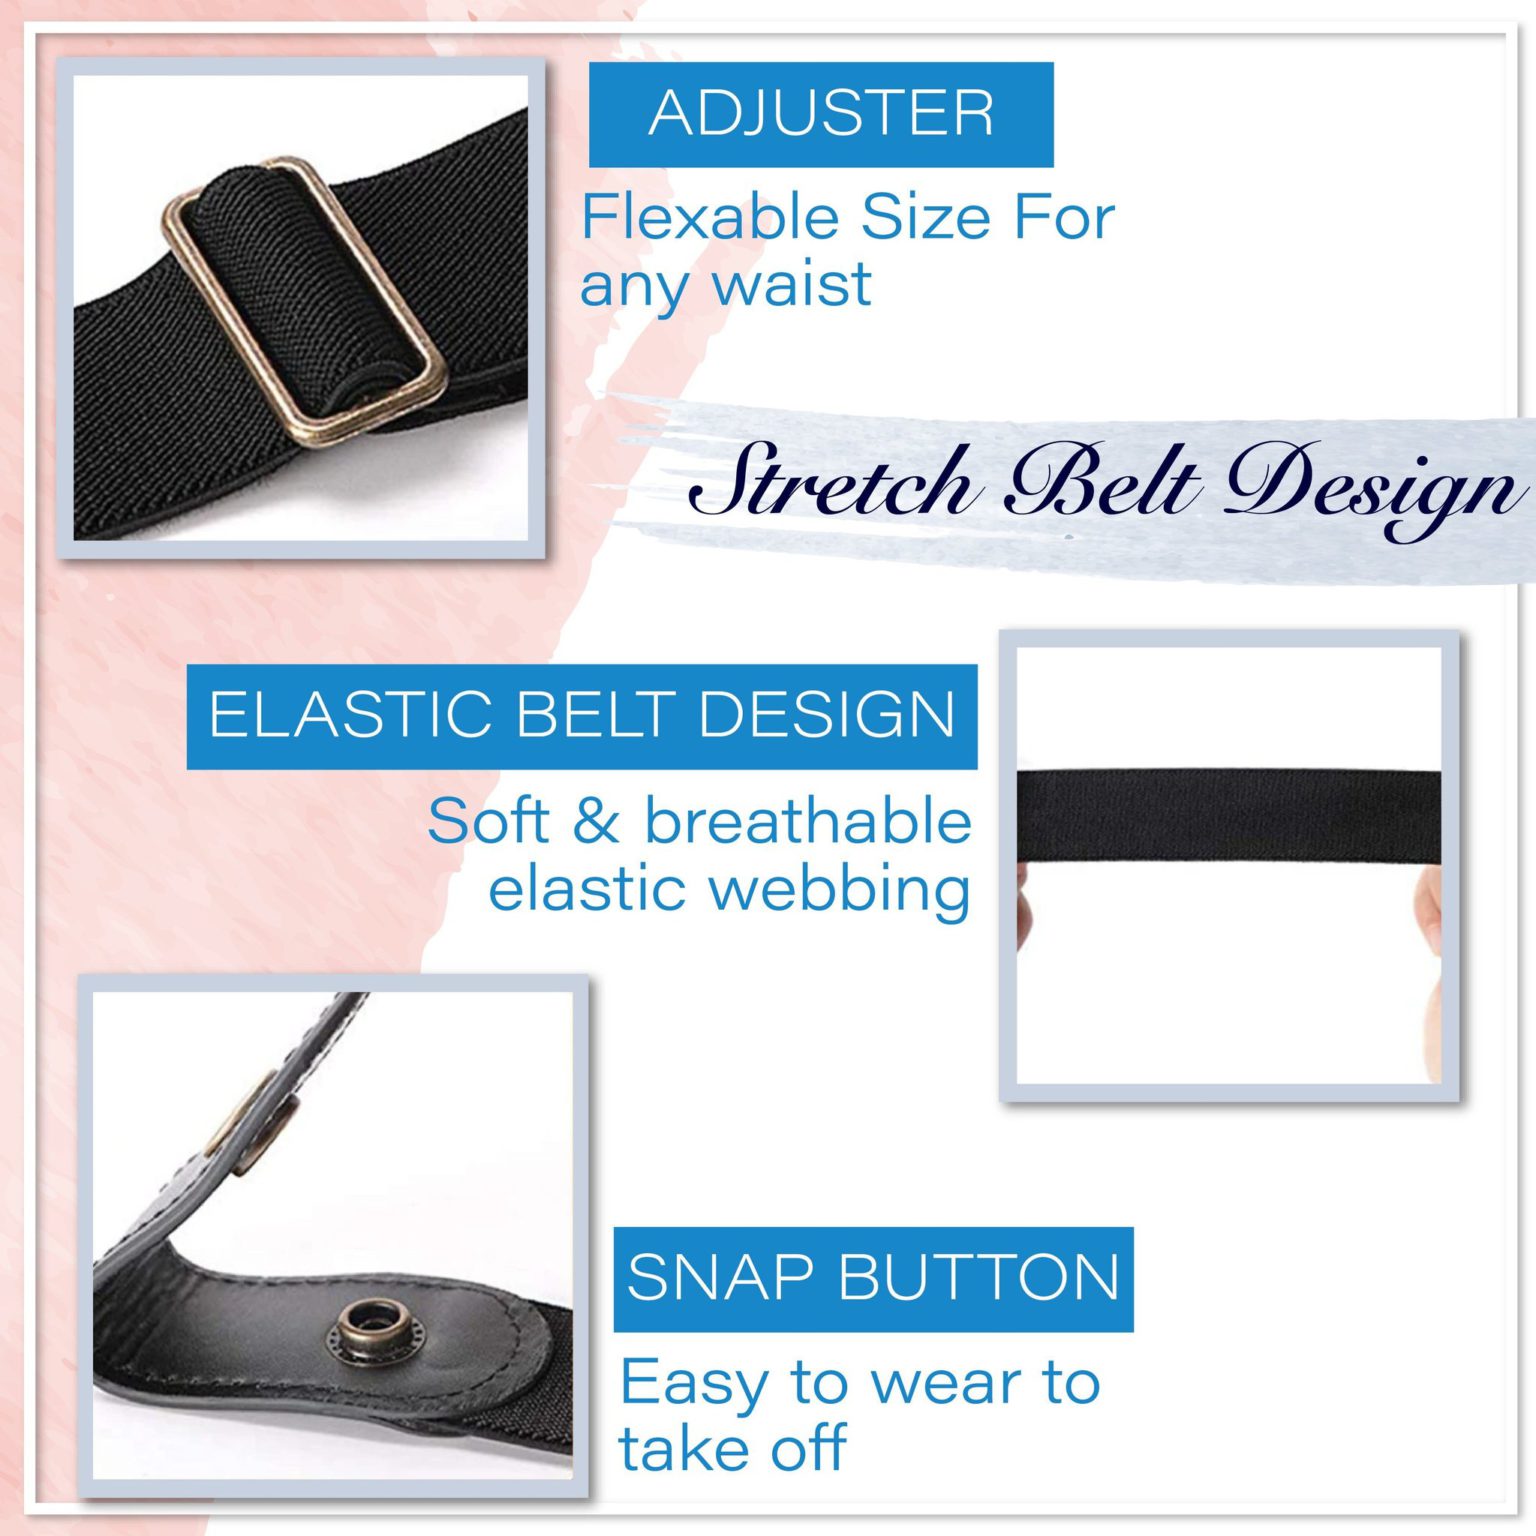 Buckle-free Invisible Elastic Waist Belts - Buy Online 75% Off - Wizzgoo